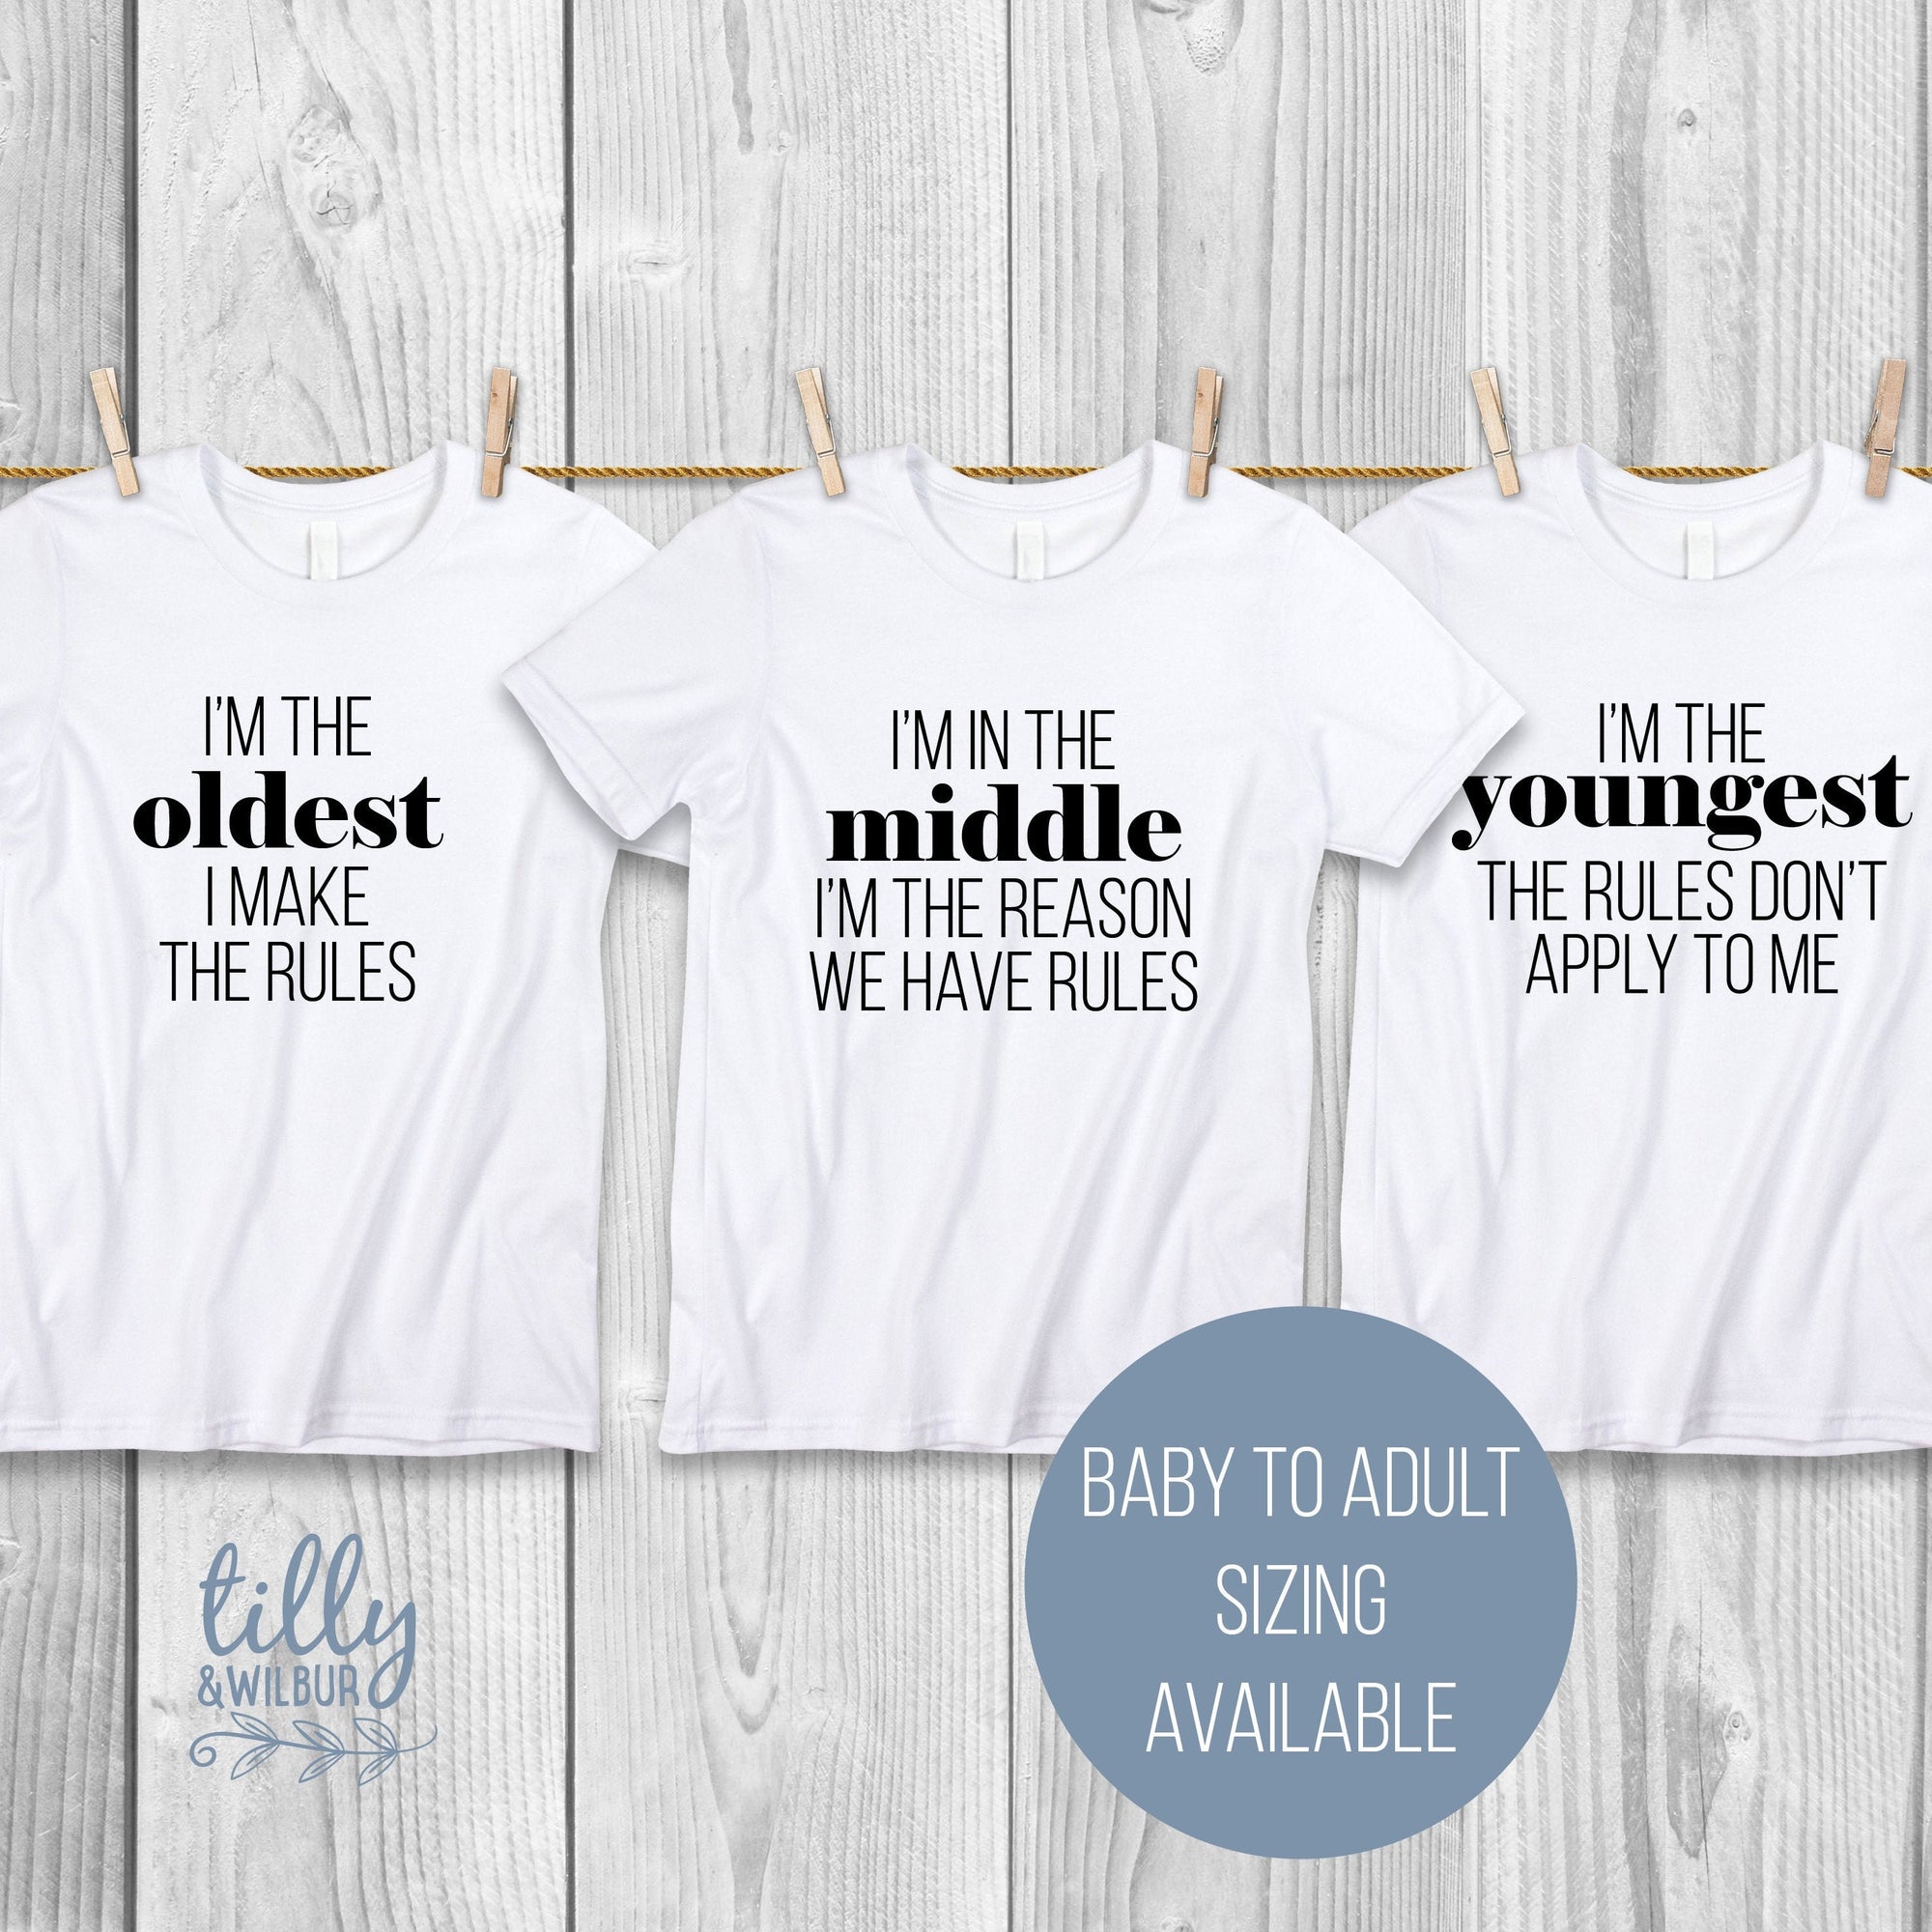 Sibling Shirt Set with Family Rules, Oldest, Middle, Youngest, Sisters, Sisters Set, Matching Family Shirts, Pecking Order, Matchy Matchy